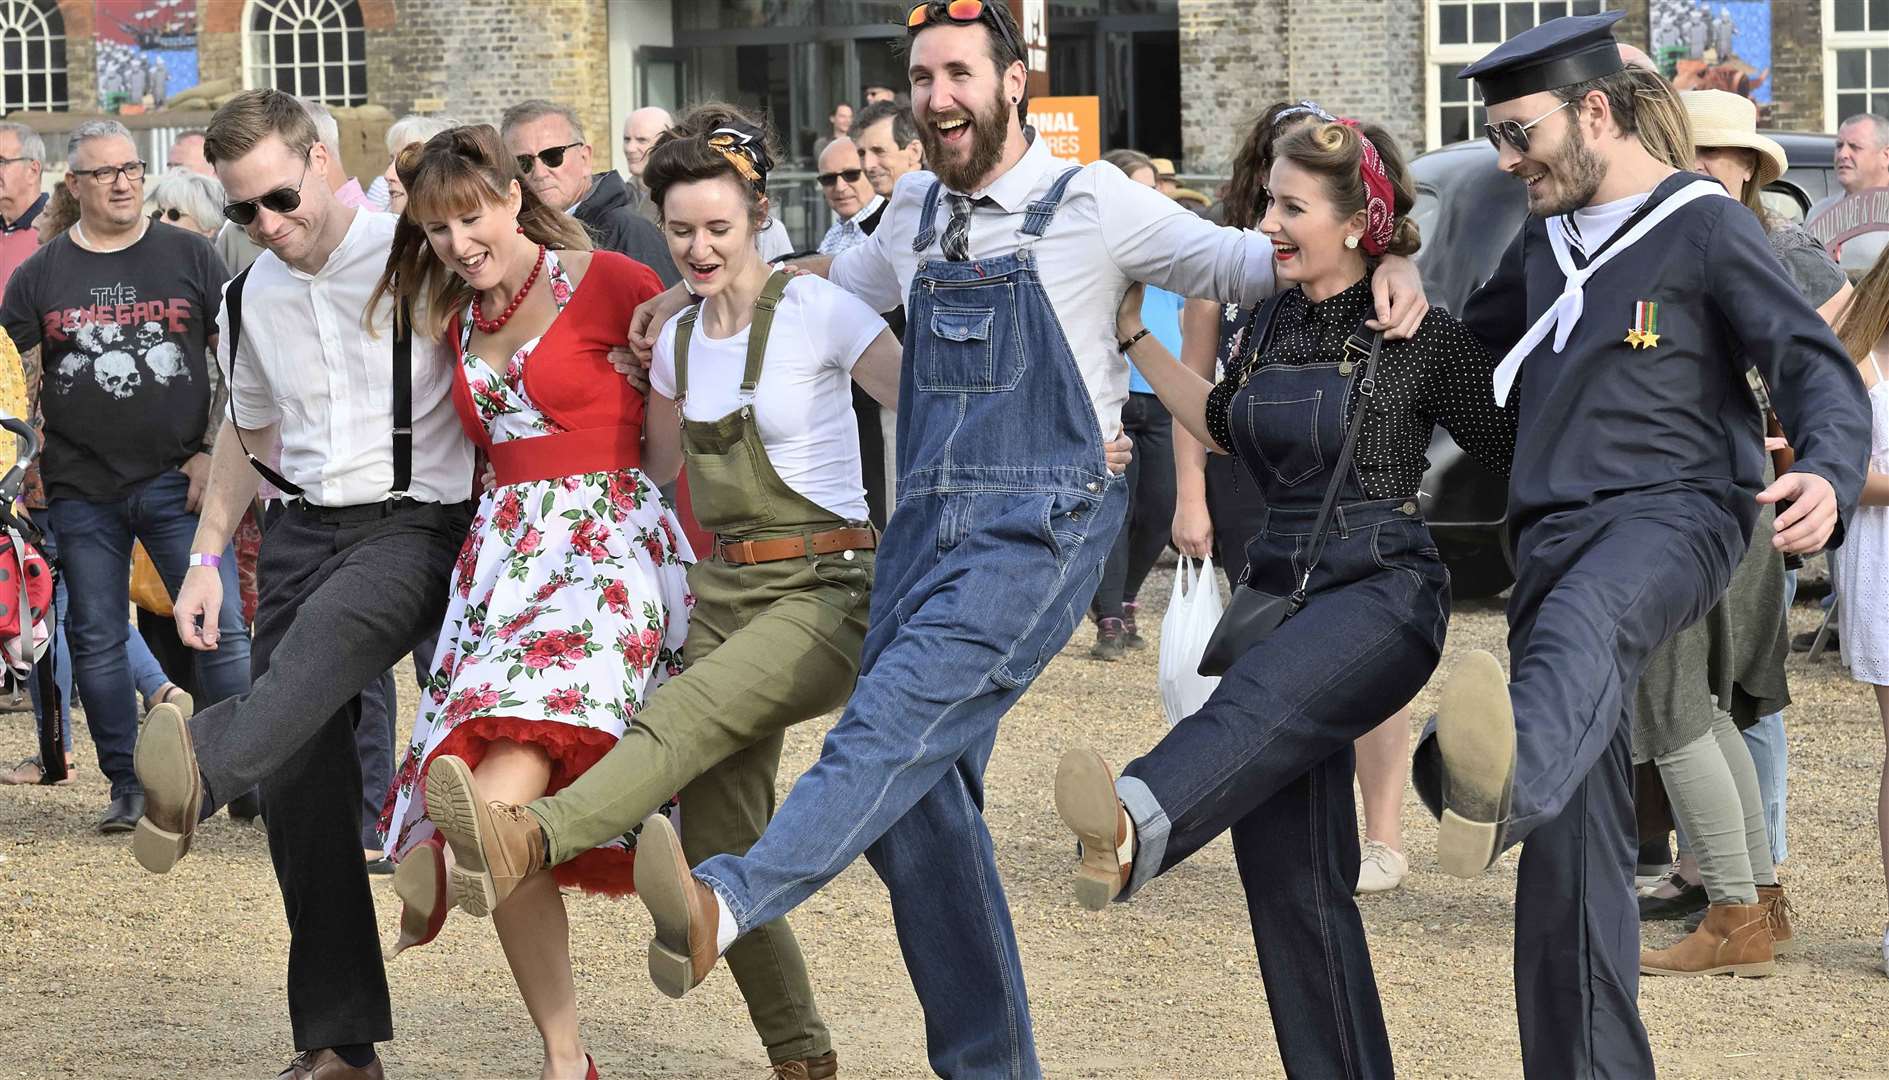 Enjoy a 40s-style knees-up at Salute to the 40s Picture: Ray Fothergill